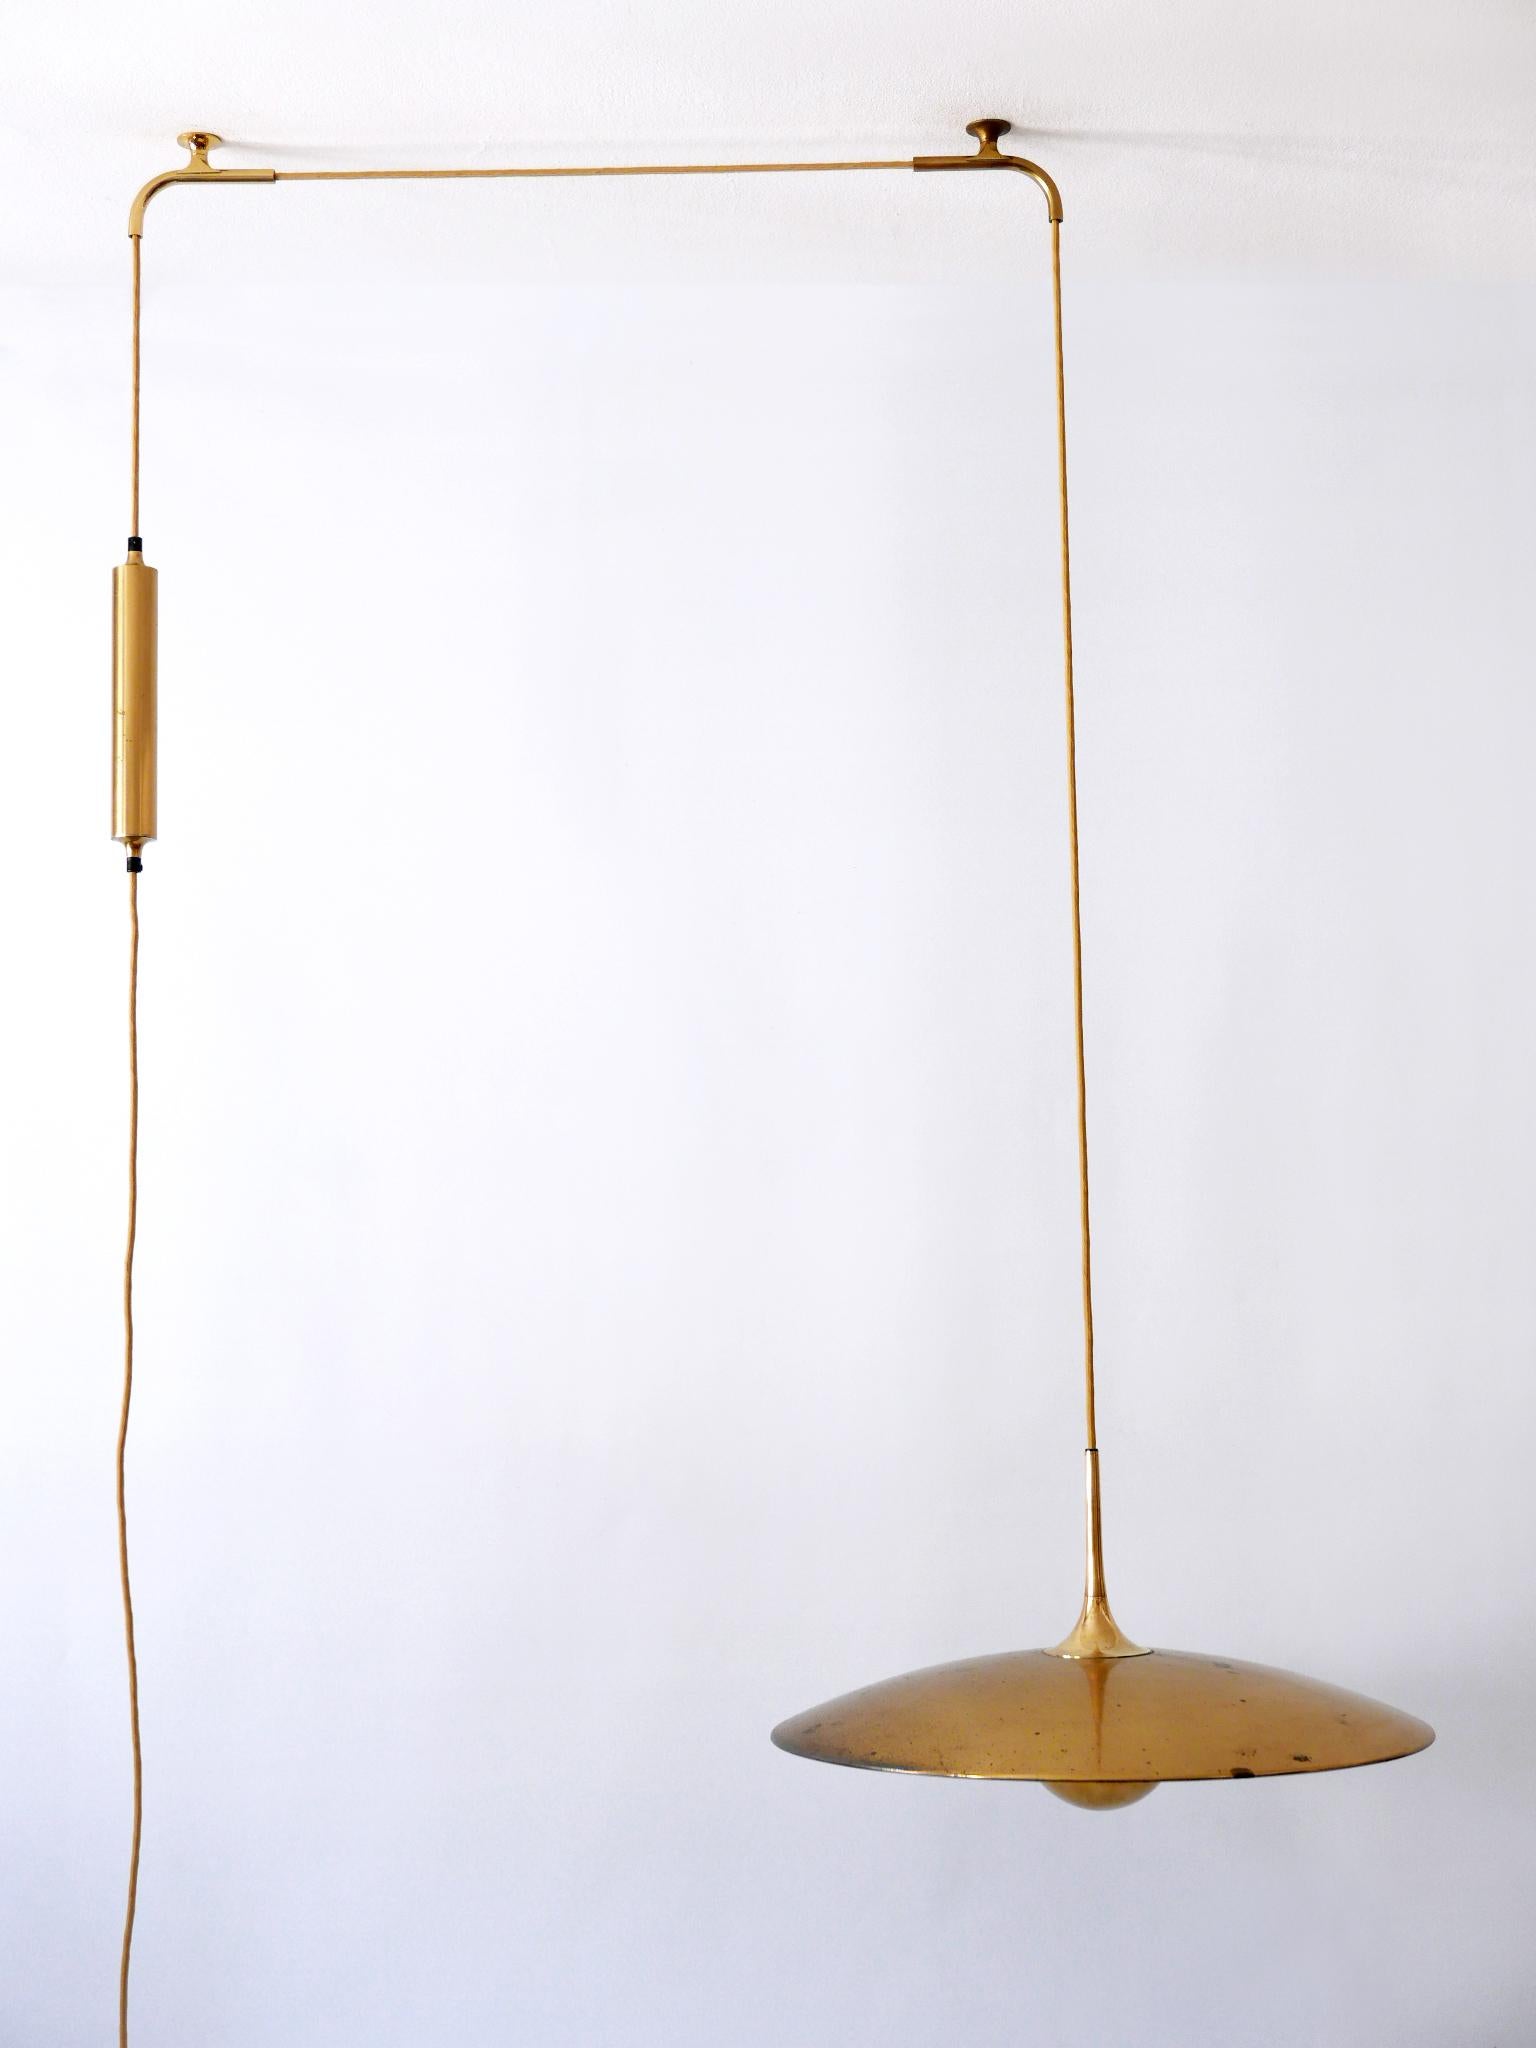 Rare Early Brass Counterweight Pendant Lamp 'Onos 55' by Florian Schulz 1960s 1